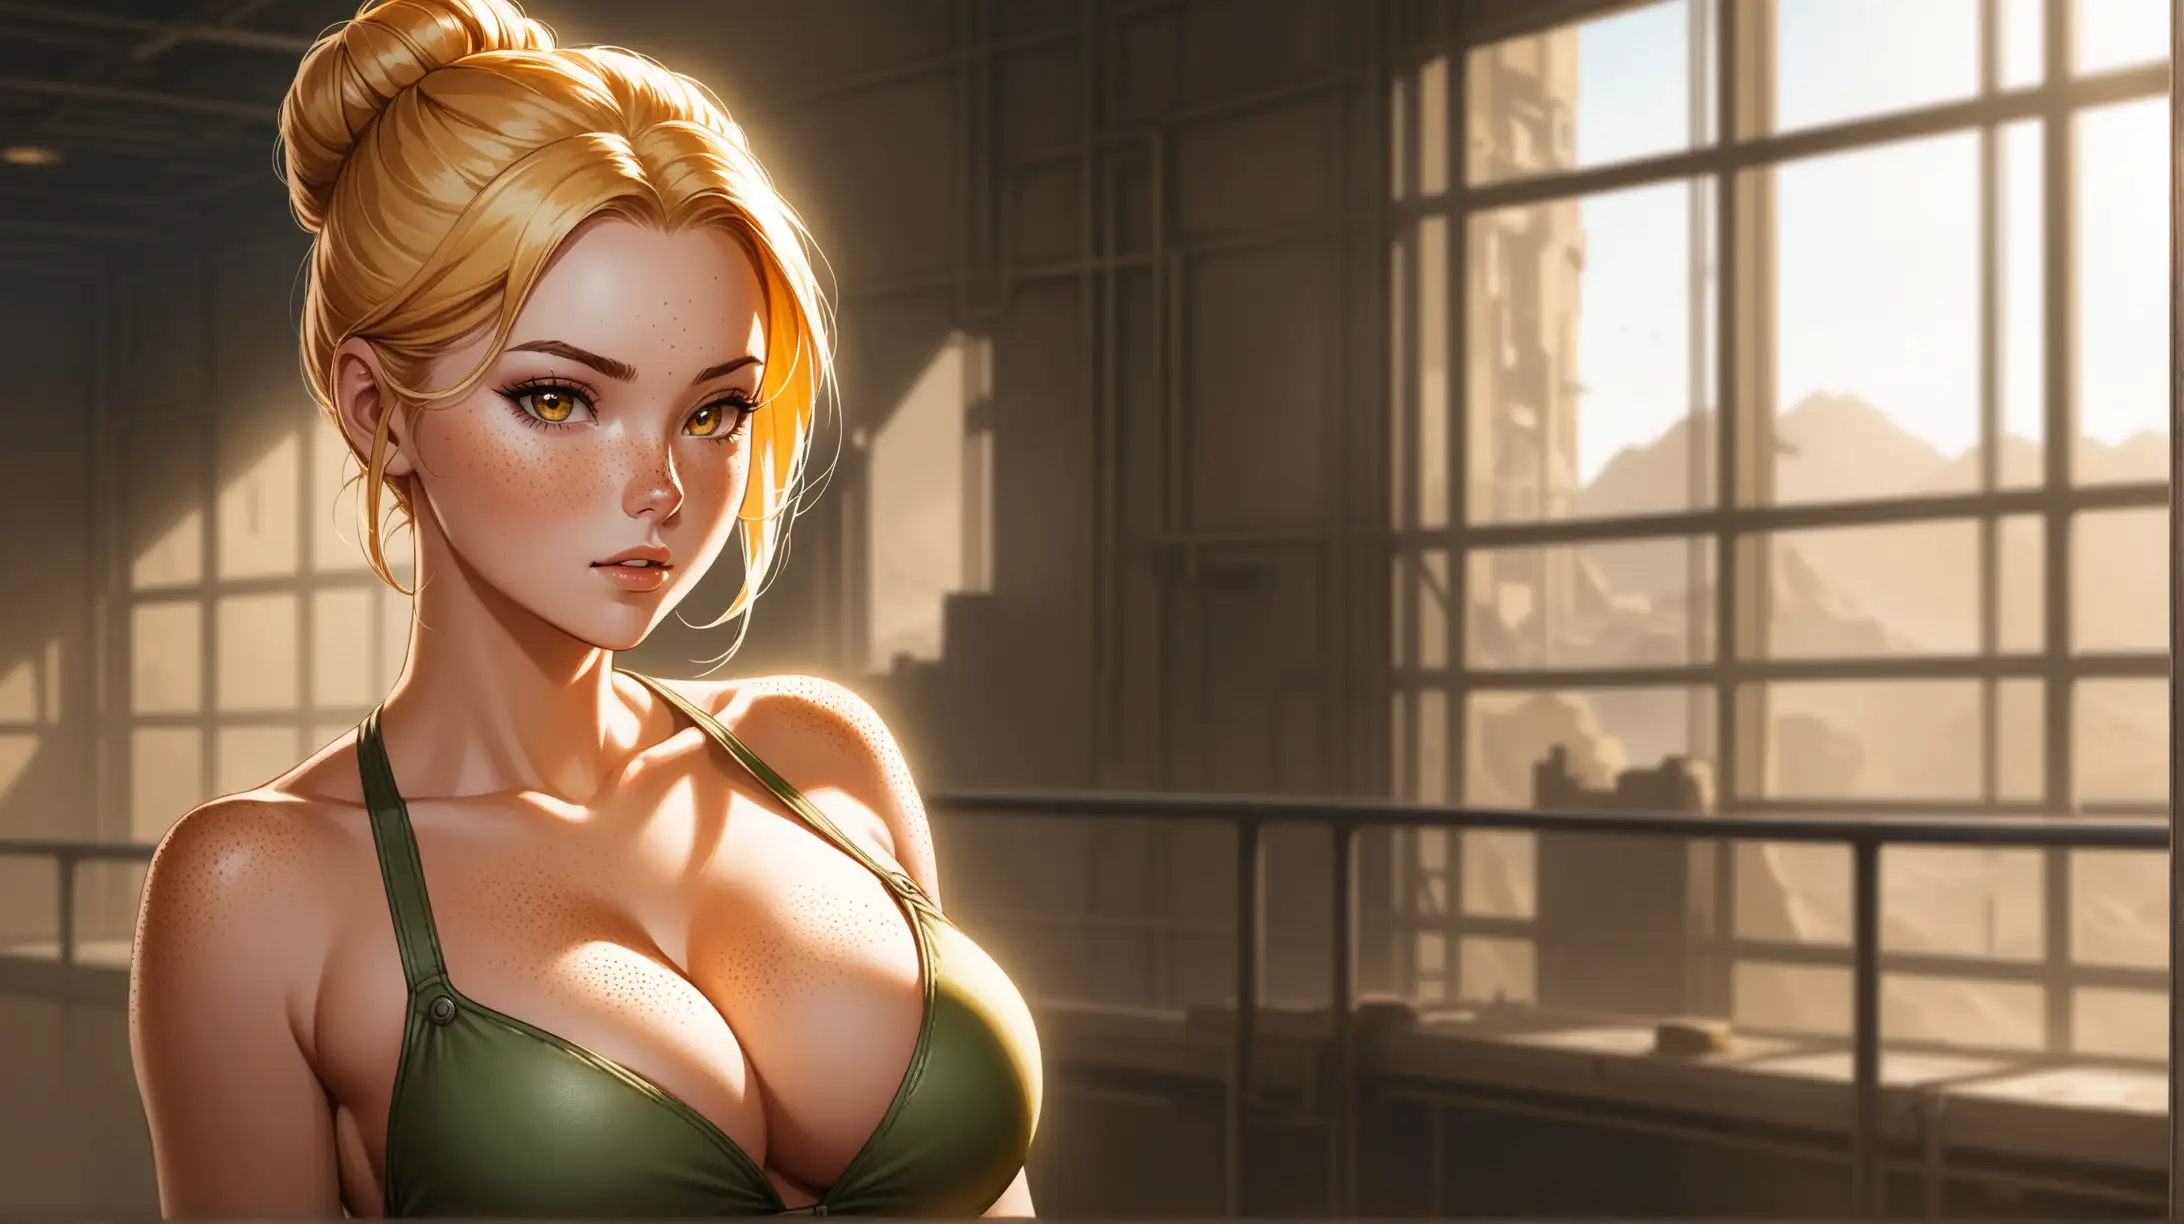 Seductive Blonde Woman with FalloutInspired Outfit in Natural Lighting